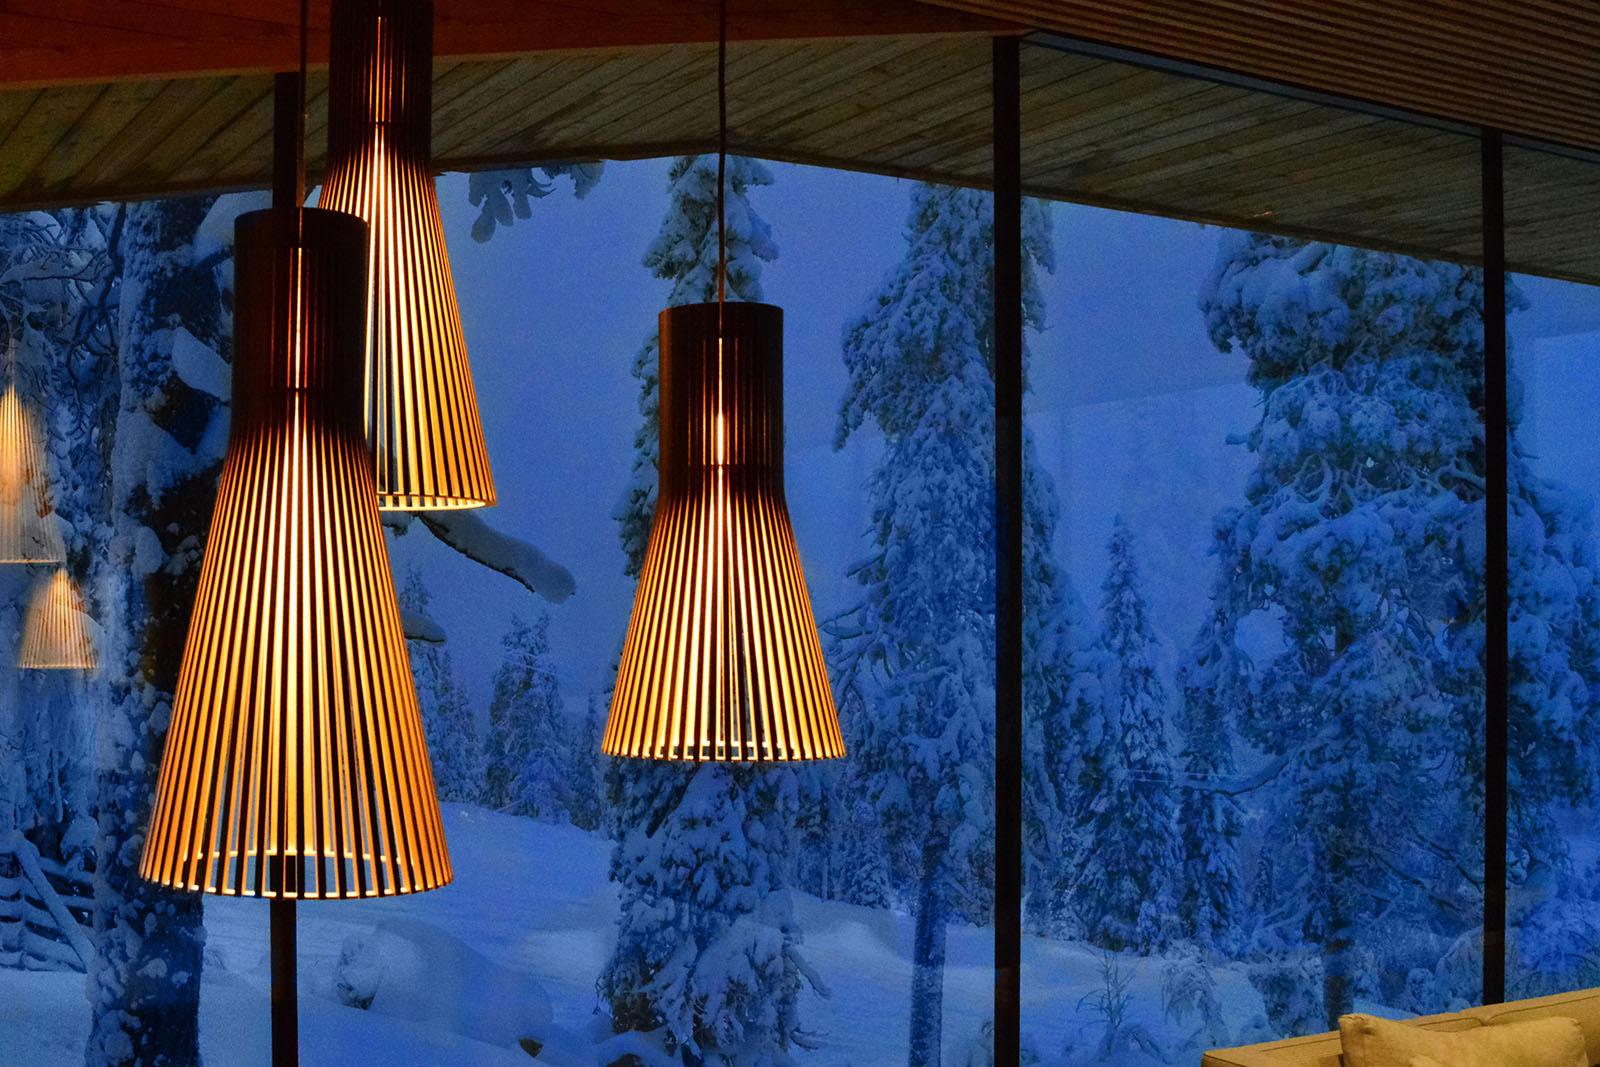 Three pendant lamps in front of a blue, snowy scenery outside the window.